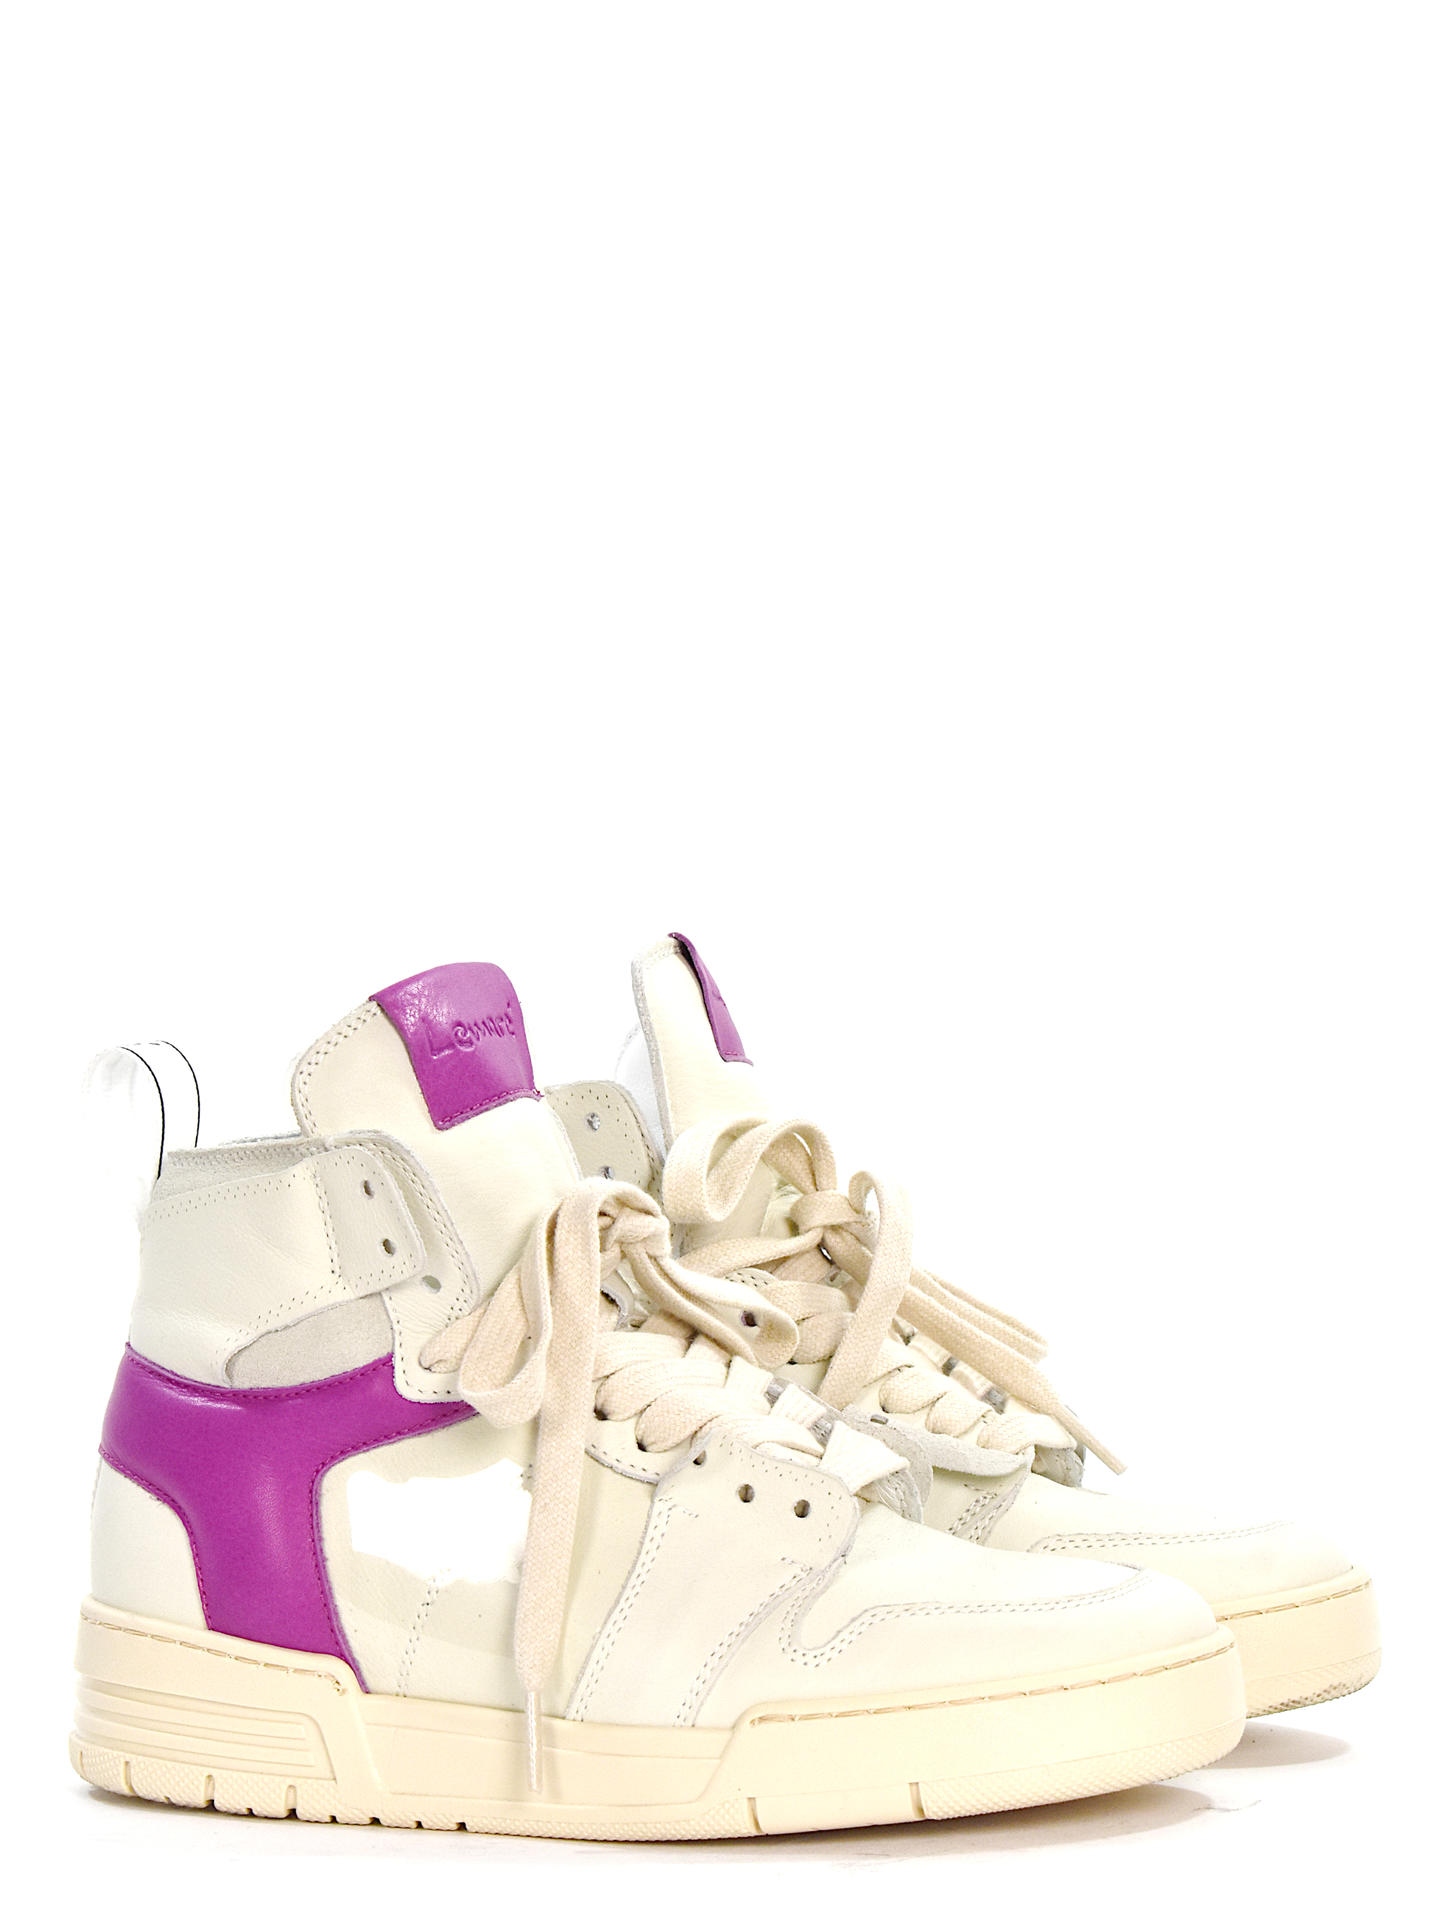 SNEAKERS LEMARE' 3013 BIANCO